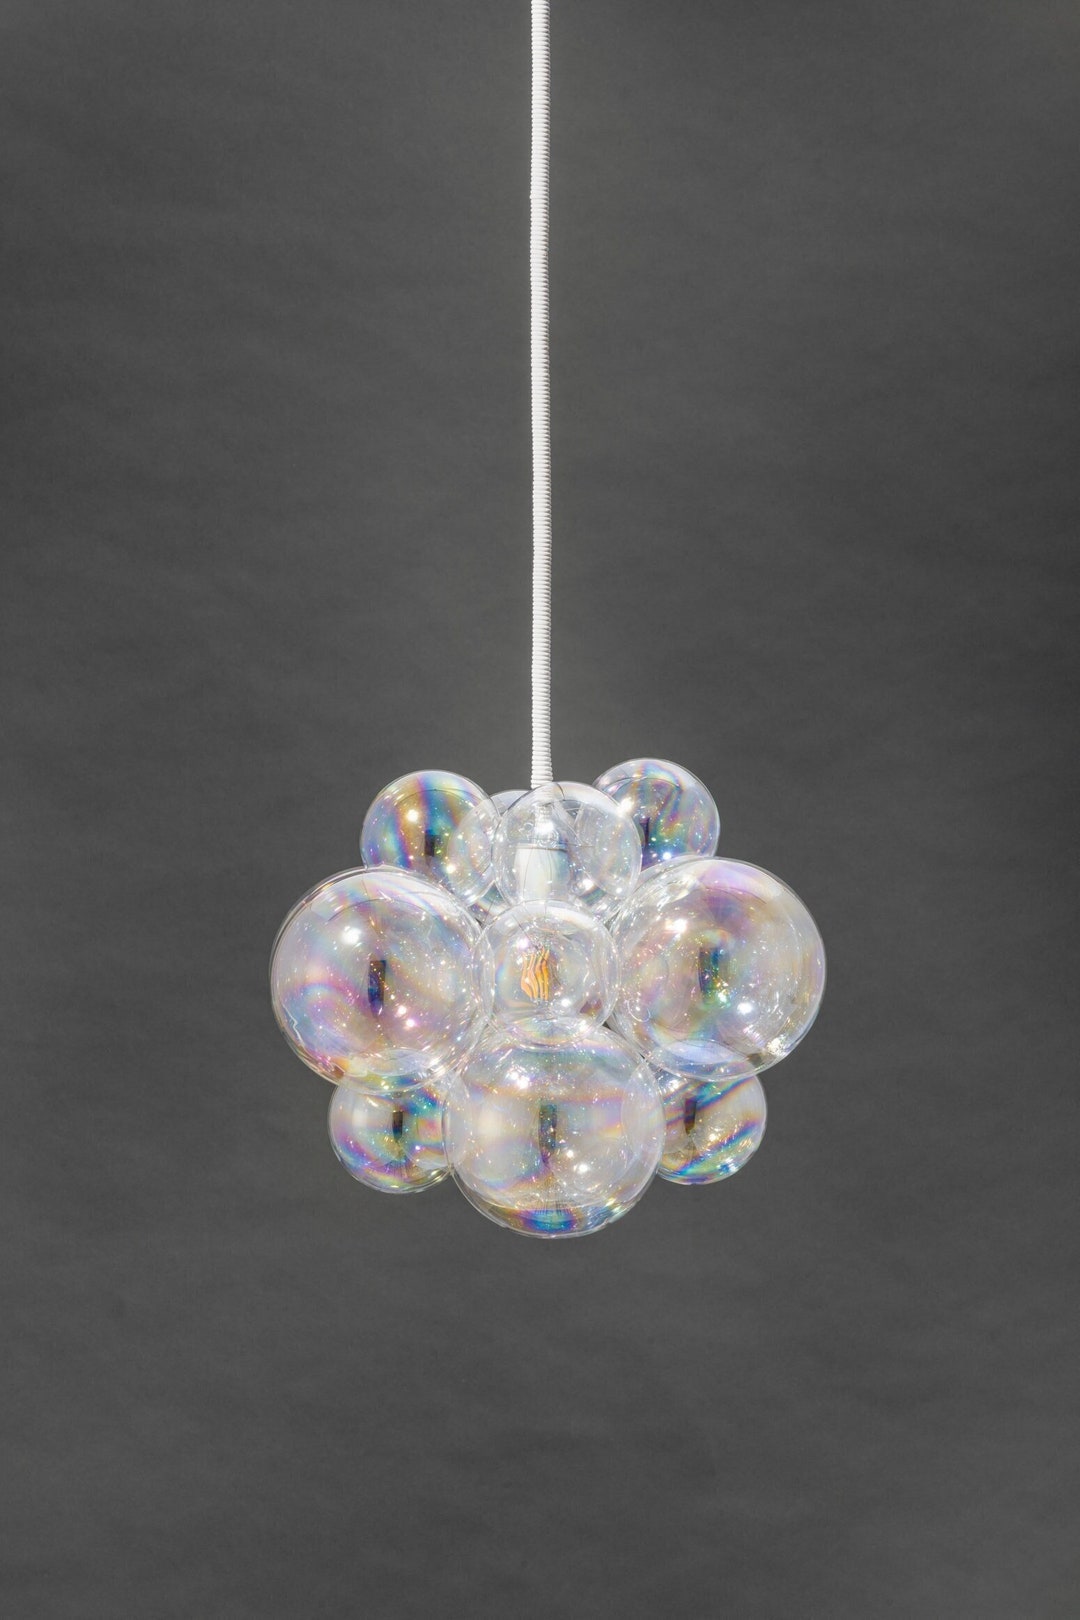 The Iridescent Waterfall Glass Bubble Chandelier